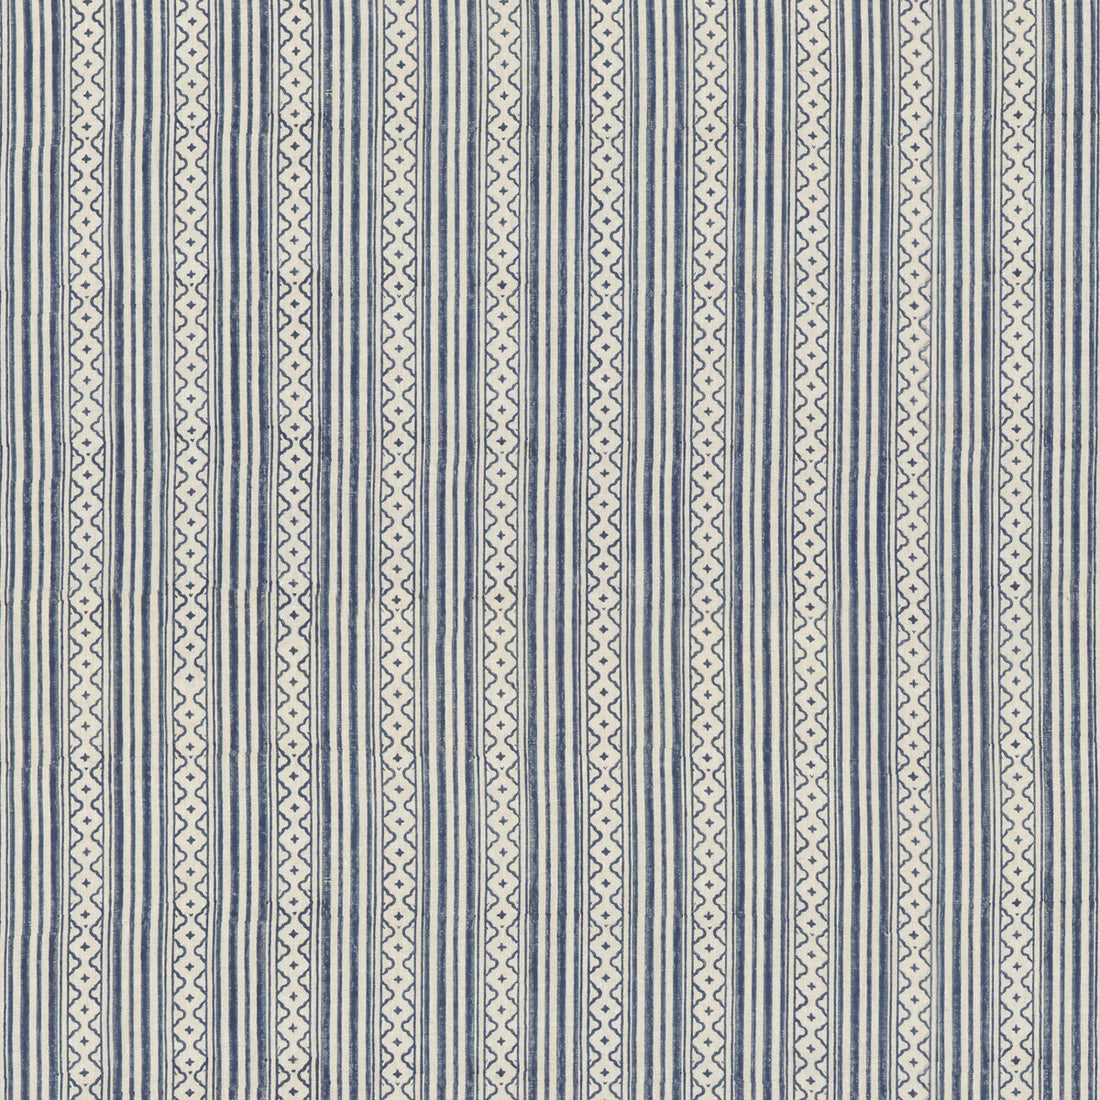 Ebury Stripe fabric in blue color - pattern BP10914.1.0 - by G P &amp; J Baker in the Portobello collection